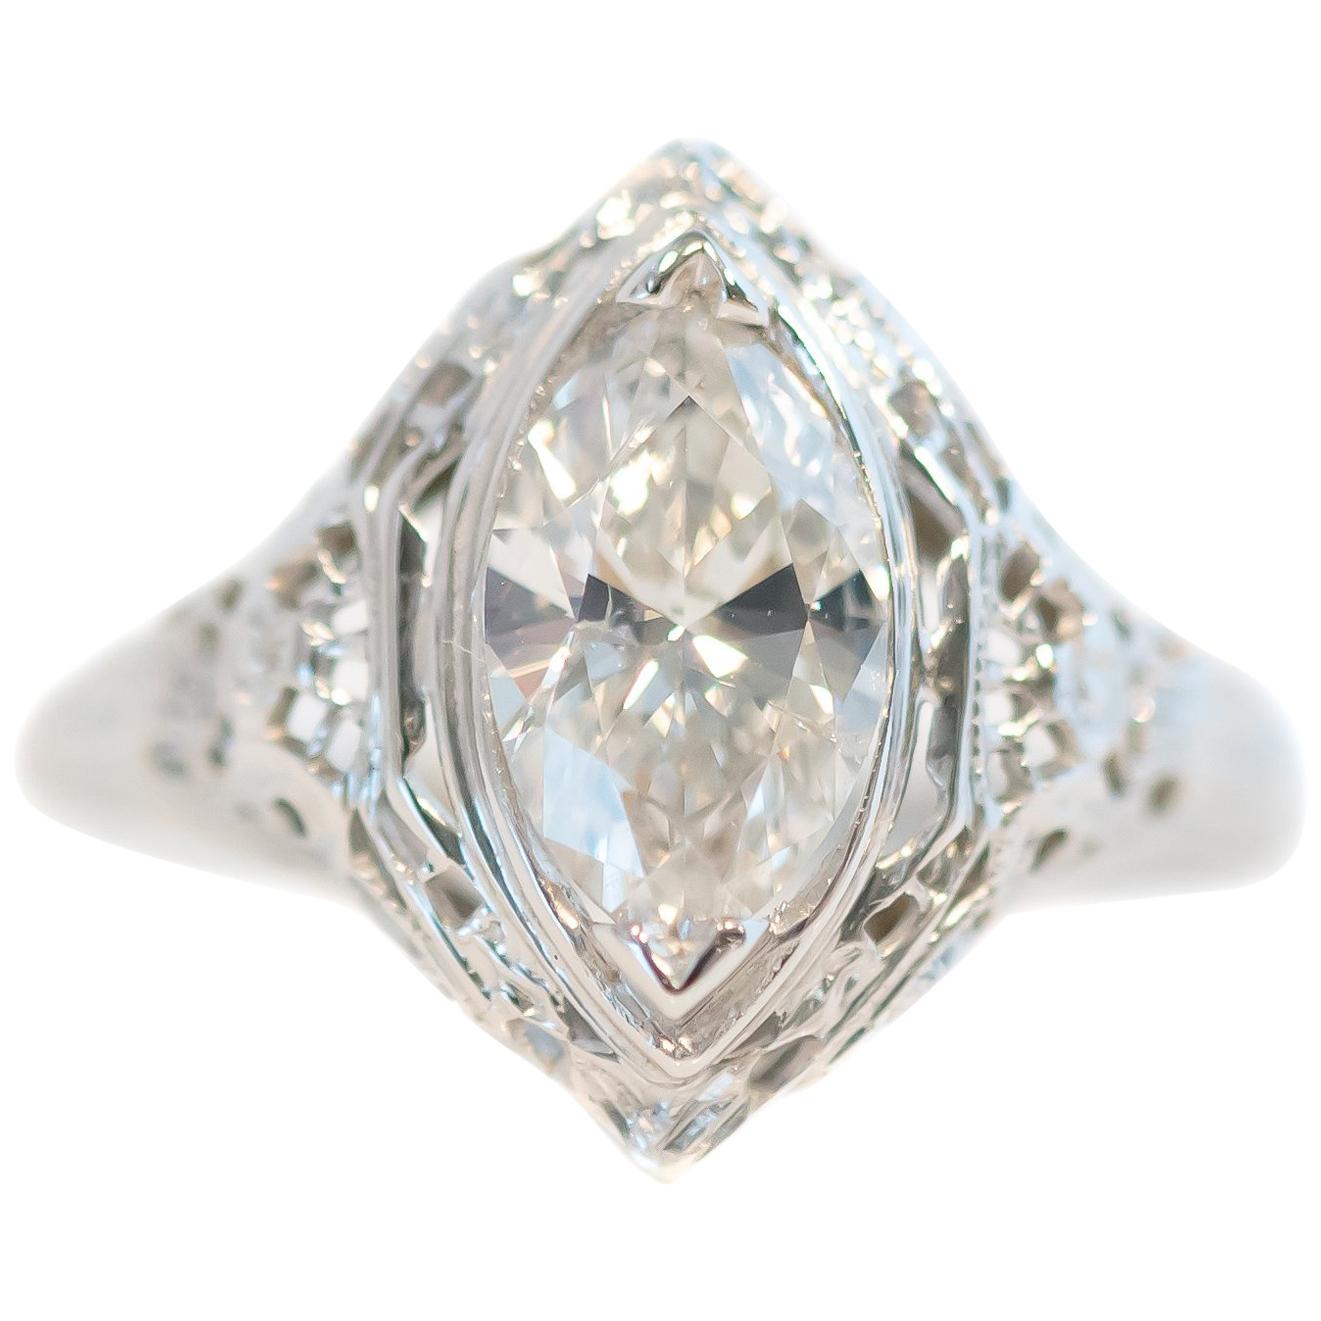 1940s 1 Carat Marquise Diamond Solitaire and 18 Karat White Gold Filigree Ring